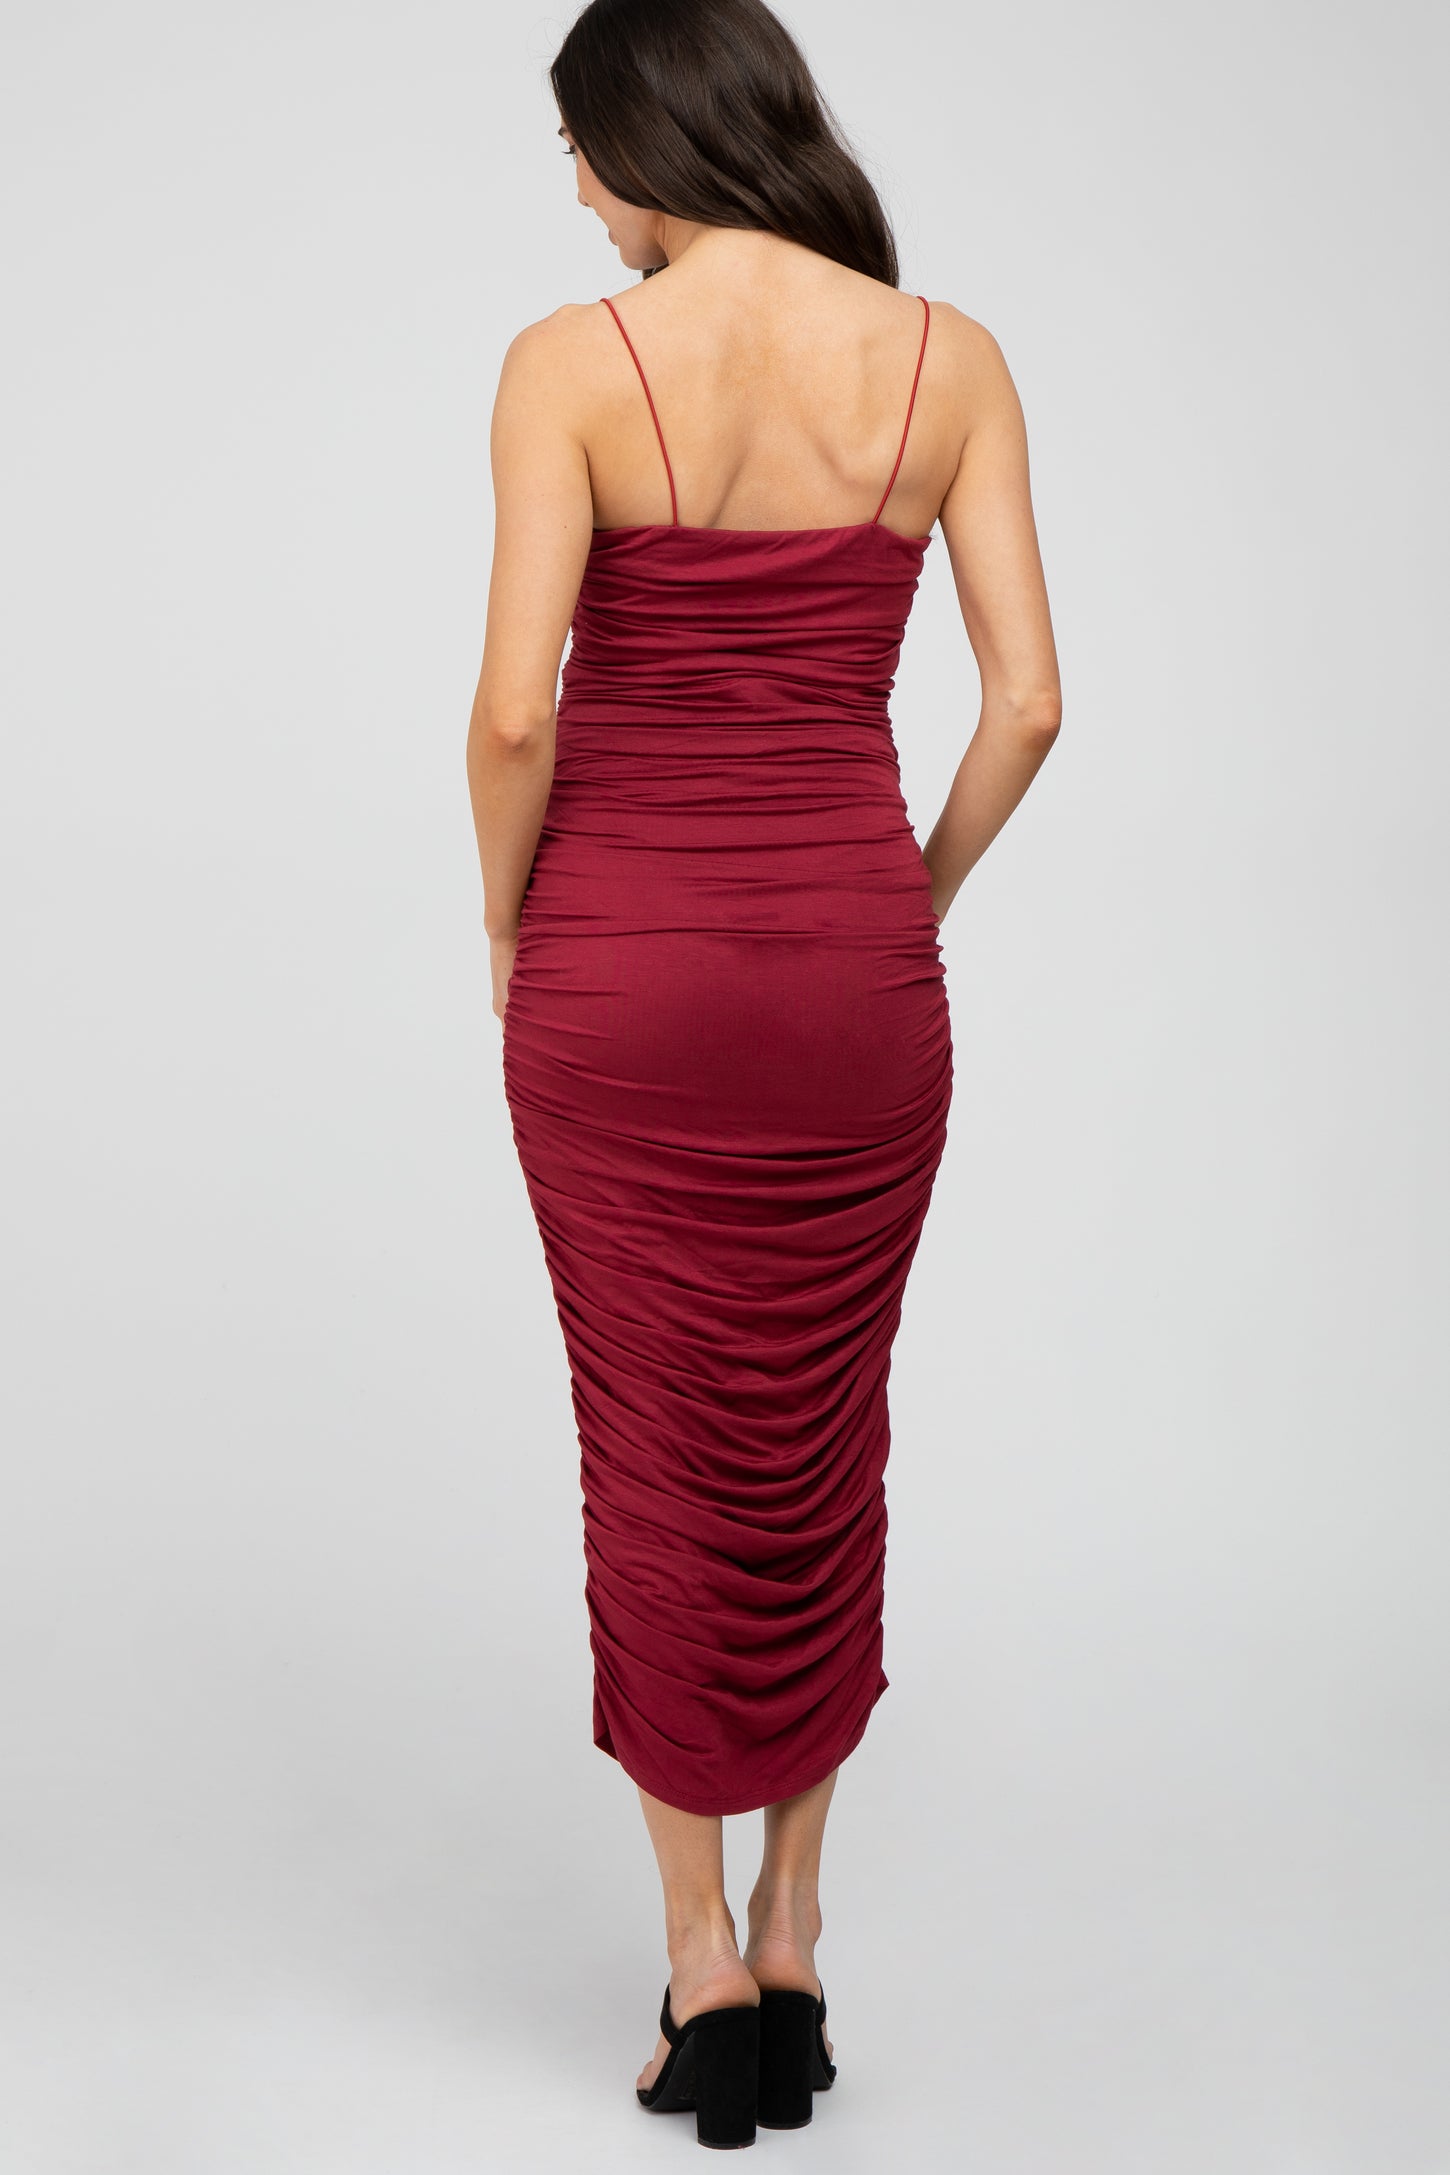 Burgundy Ruched Fitted Maternity Maxi Dress – PinkBlush